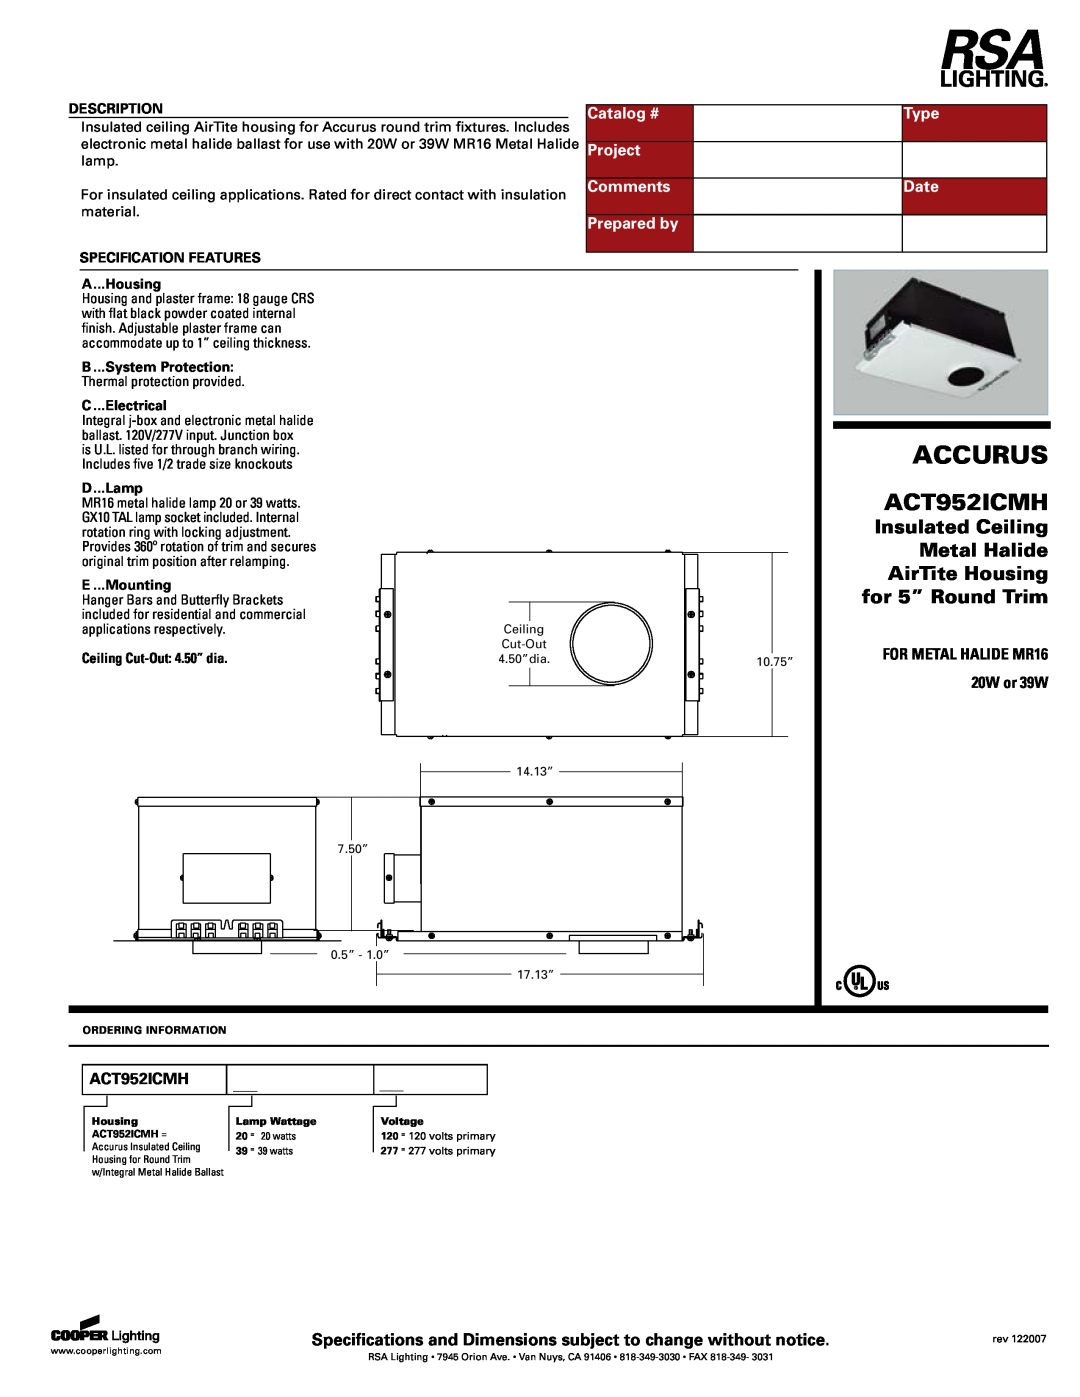 Cooper Lighting ACT952ICMH specifications Accurus, Catalog # Project Comments Prepared by, Type Date, Description 